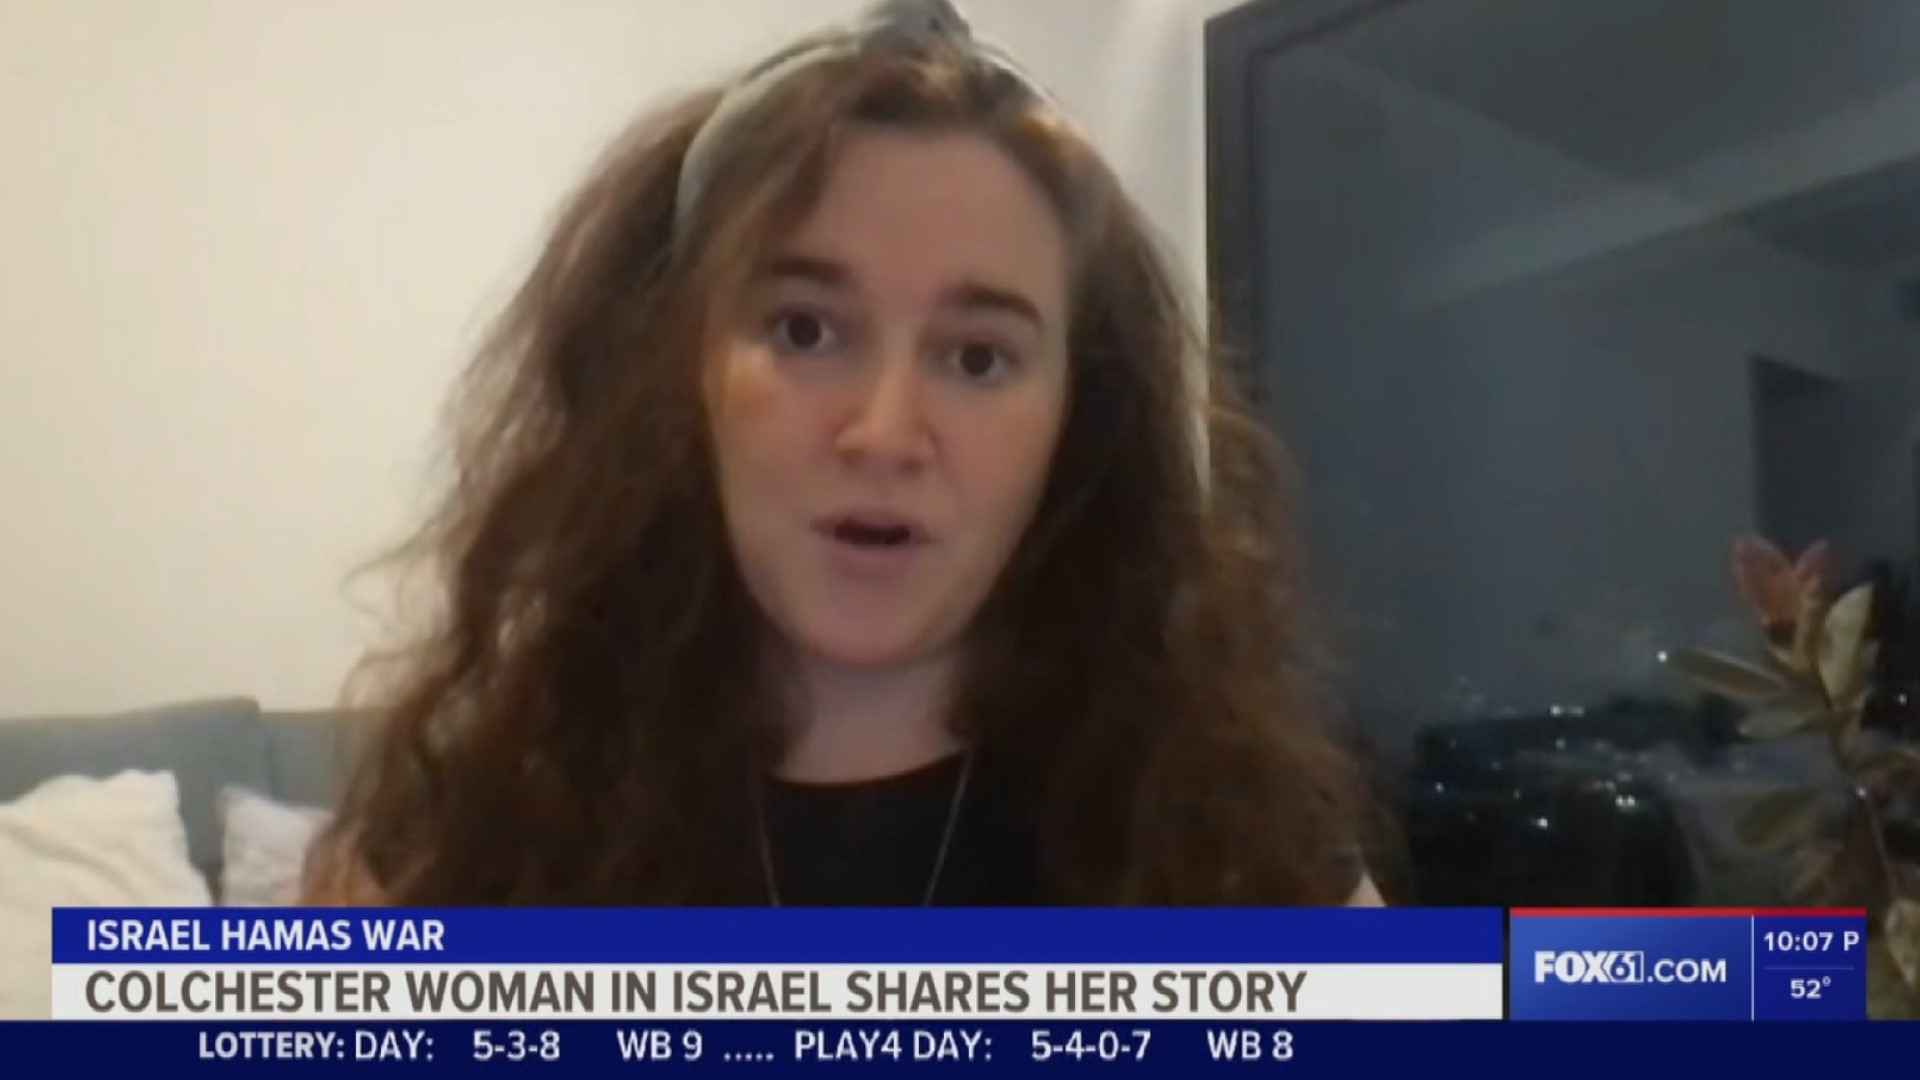 Rebecca Fox, 29, lives in Tel Aviv, Israel with her husband. She spoke about the ongoing war between Israel and Hamas.